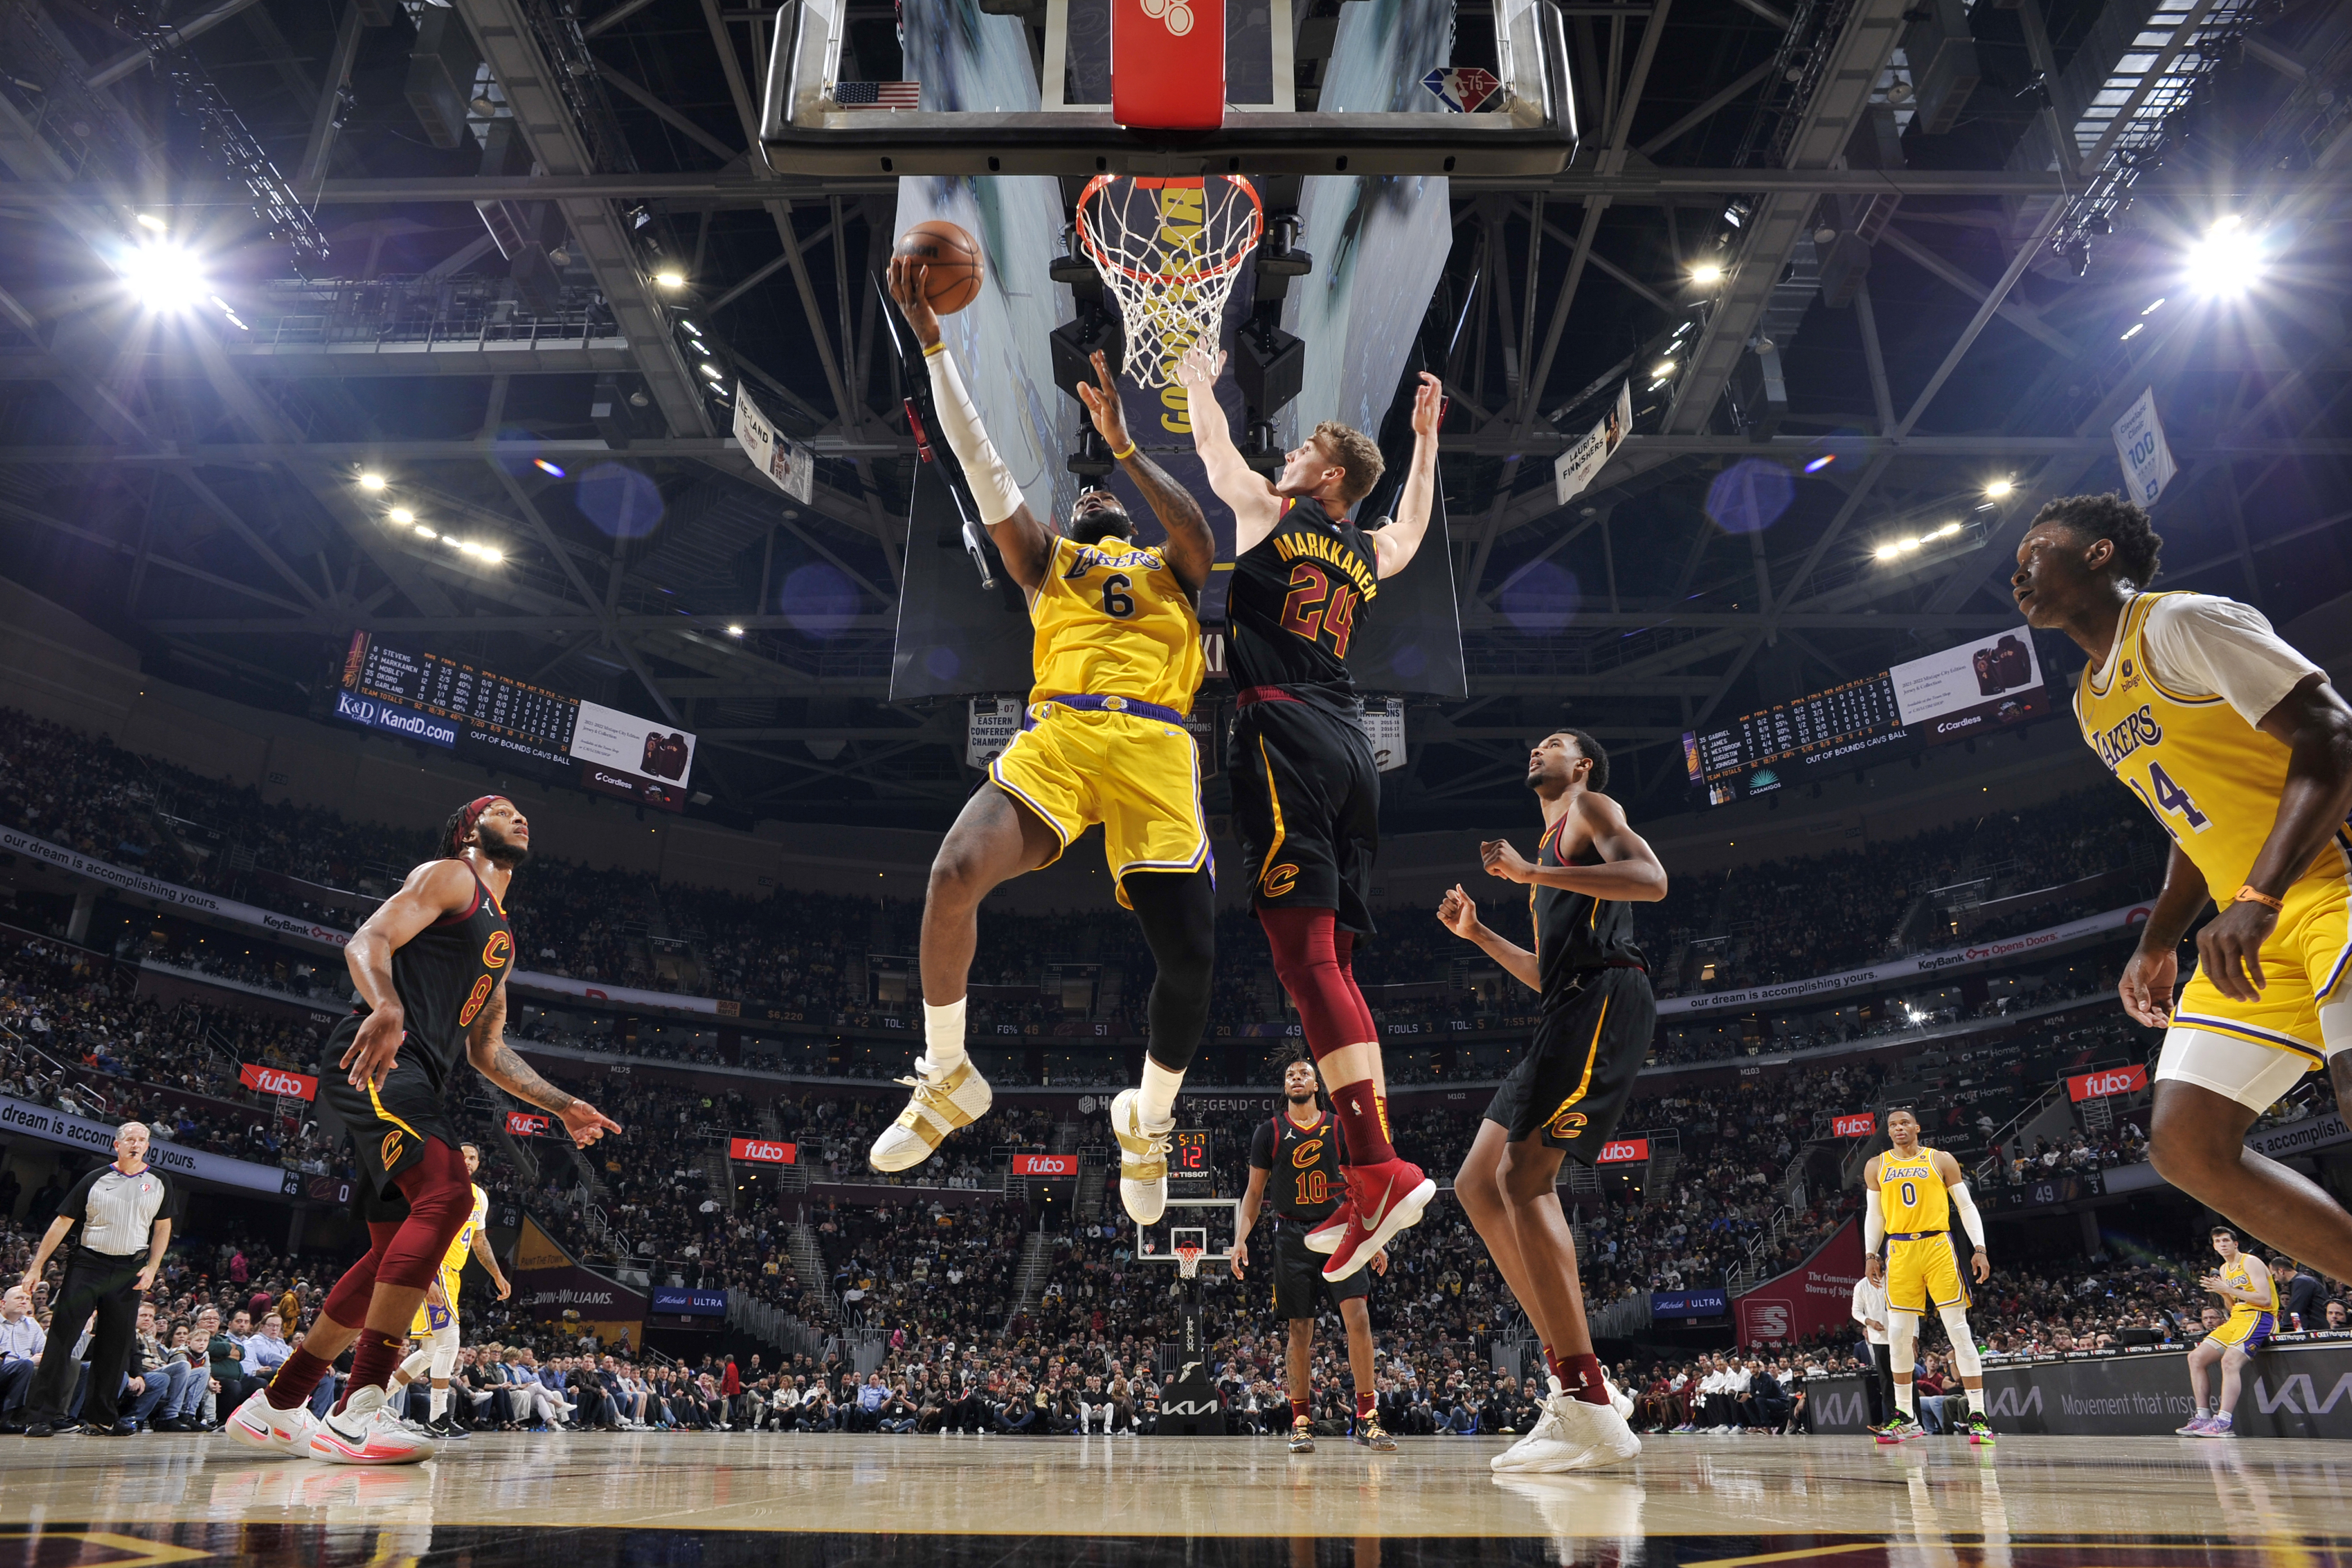 CLEVELAND: LeBron James #6 of the Los Angeles Lakers shoots the ball during the game against the Cleveland Cavaliers on March 21, 2022 at Rocket Mortgage FieldHouse in Cleveland, Ohio. - AFPn